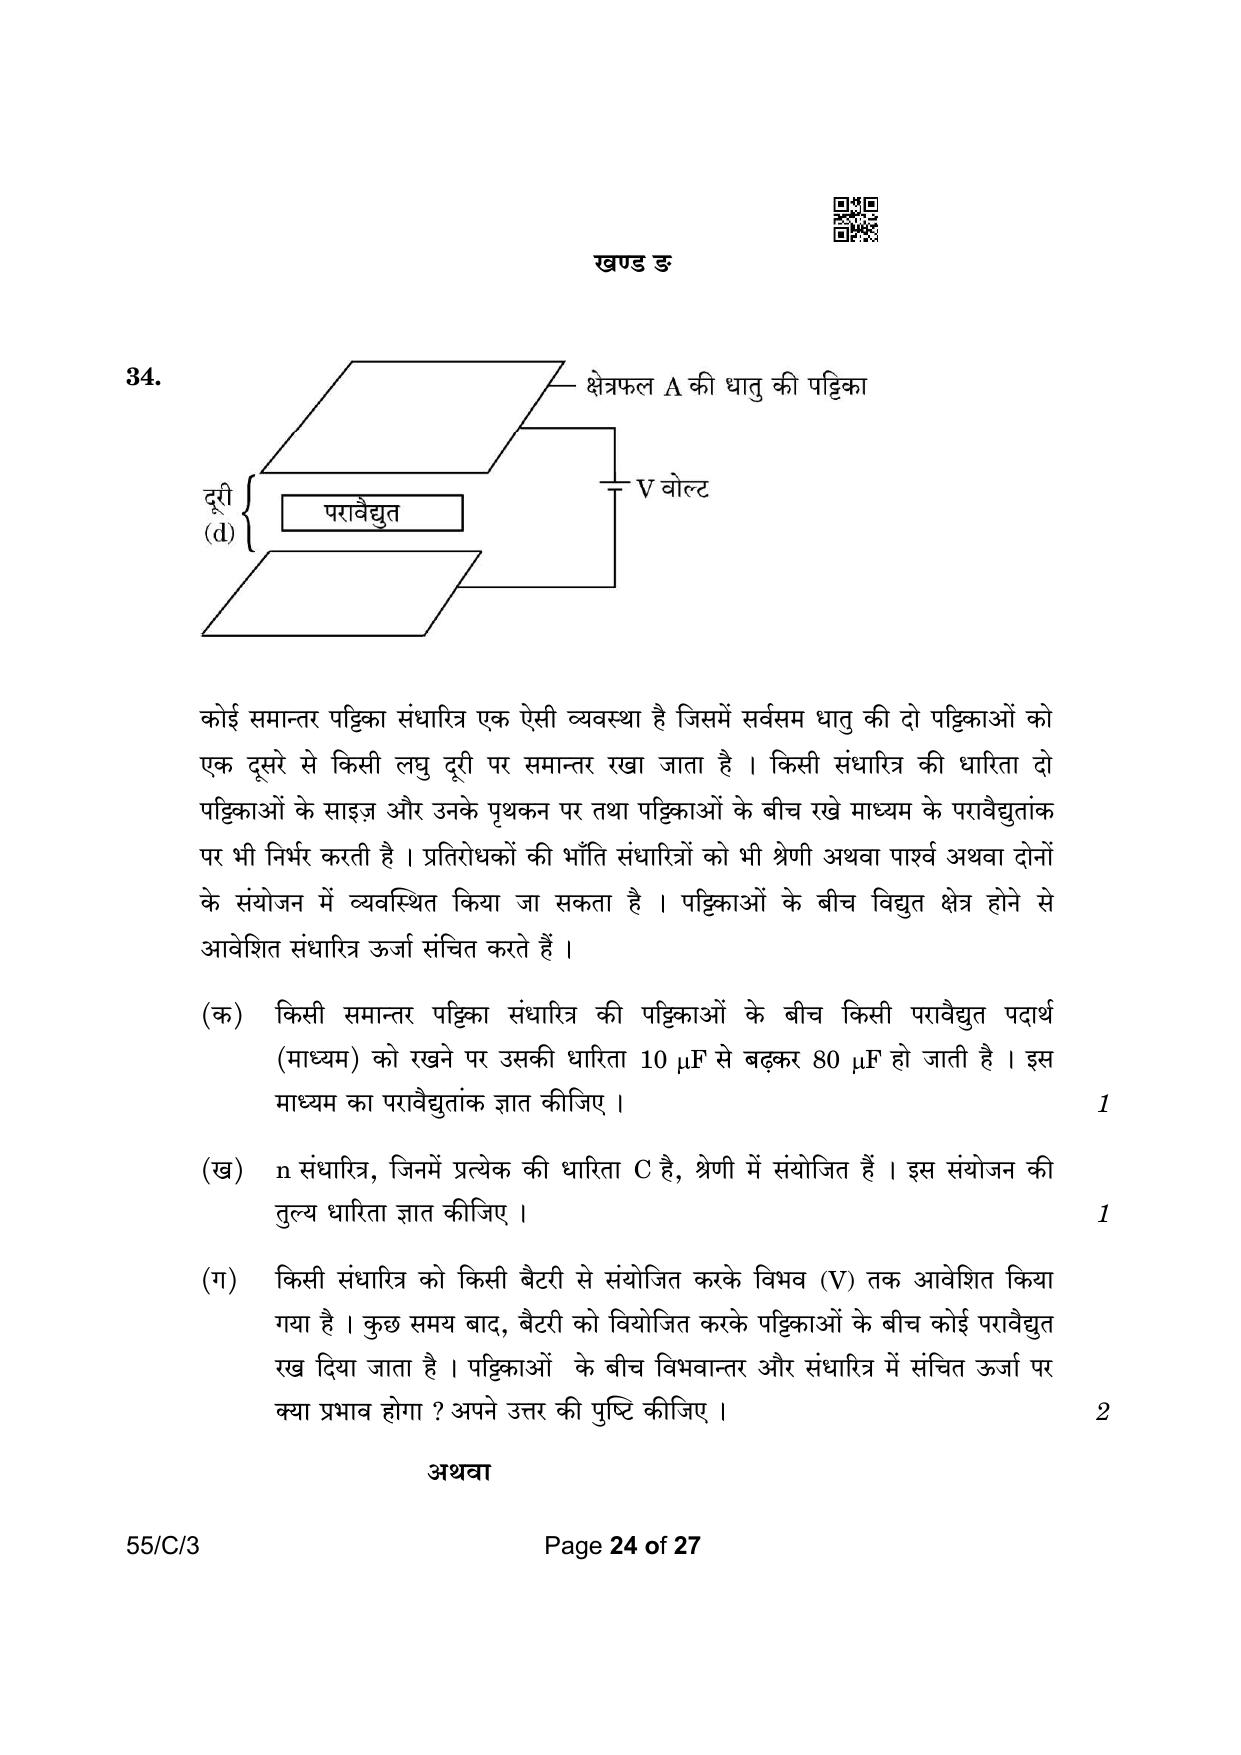 CBSE Class 12 55-3 Physics 2023 (Compartment) Question Paper - Page 24